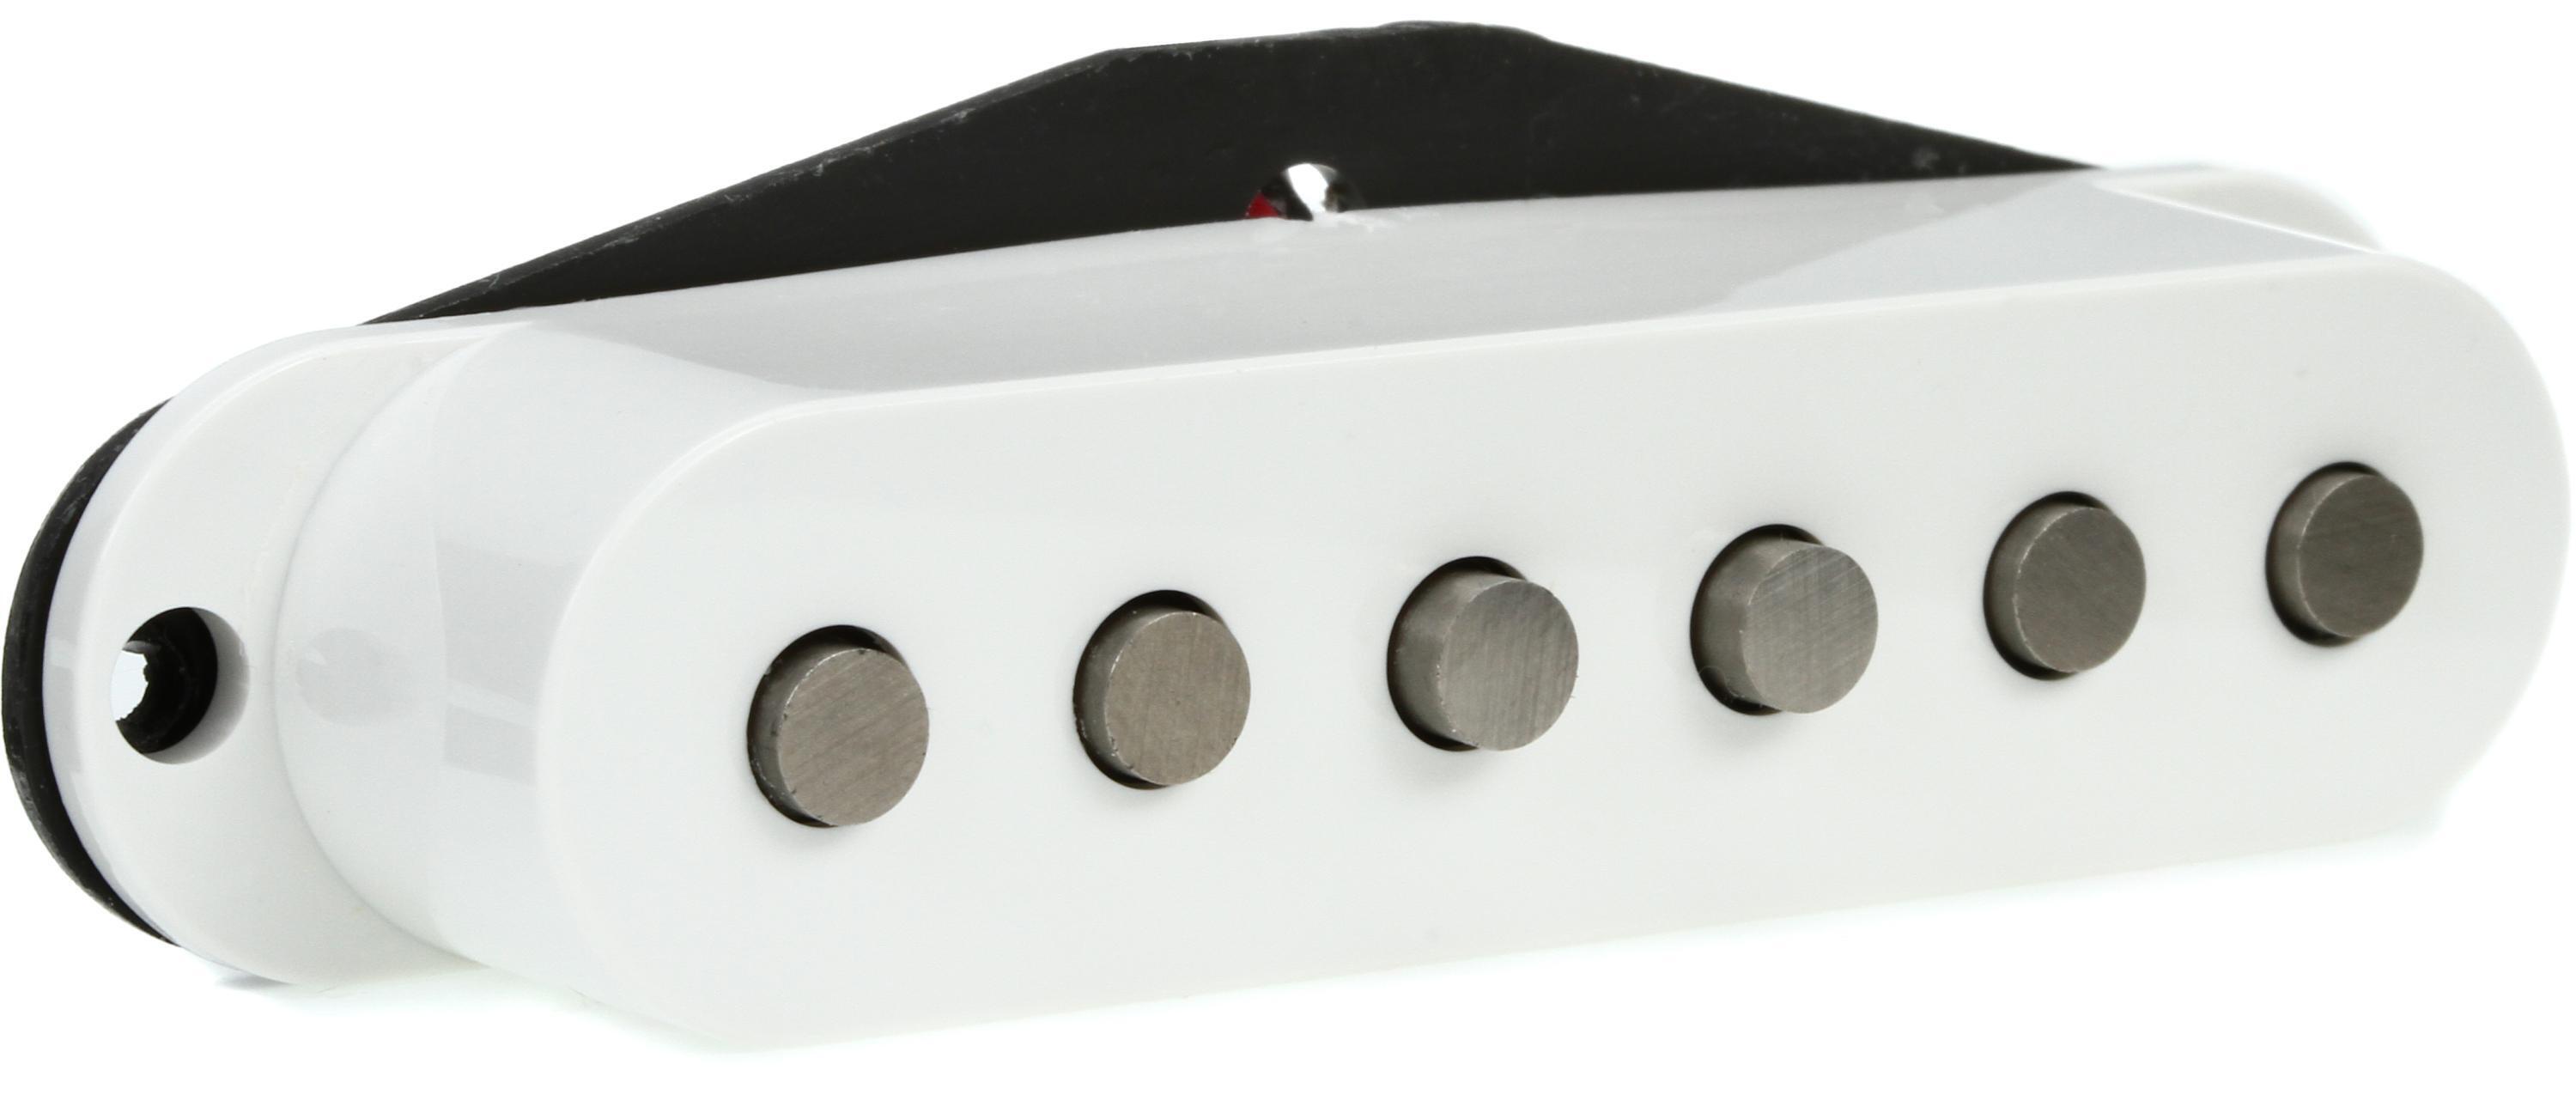 DiMarzio DP117 HS-3 Single-coil Pickup - White | Sweetwater